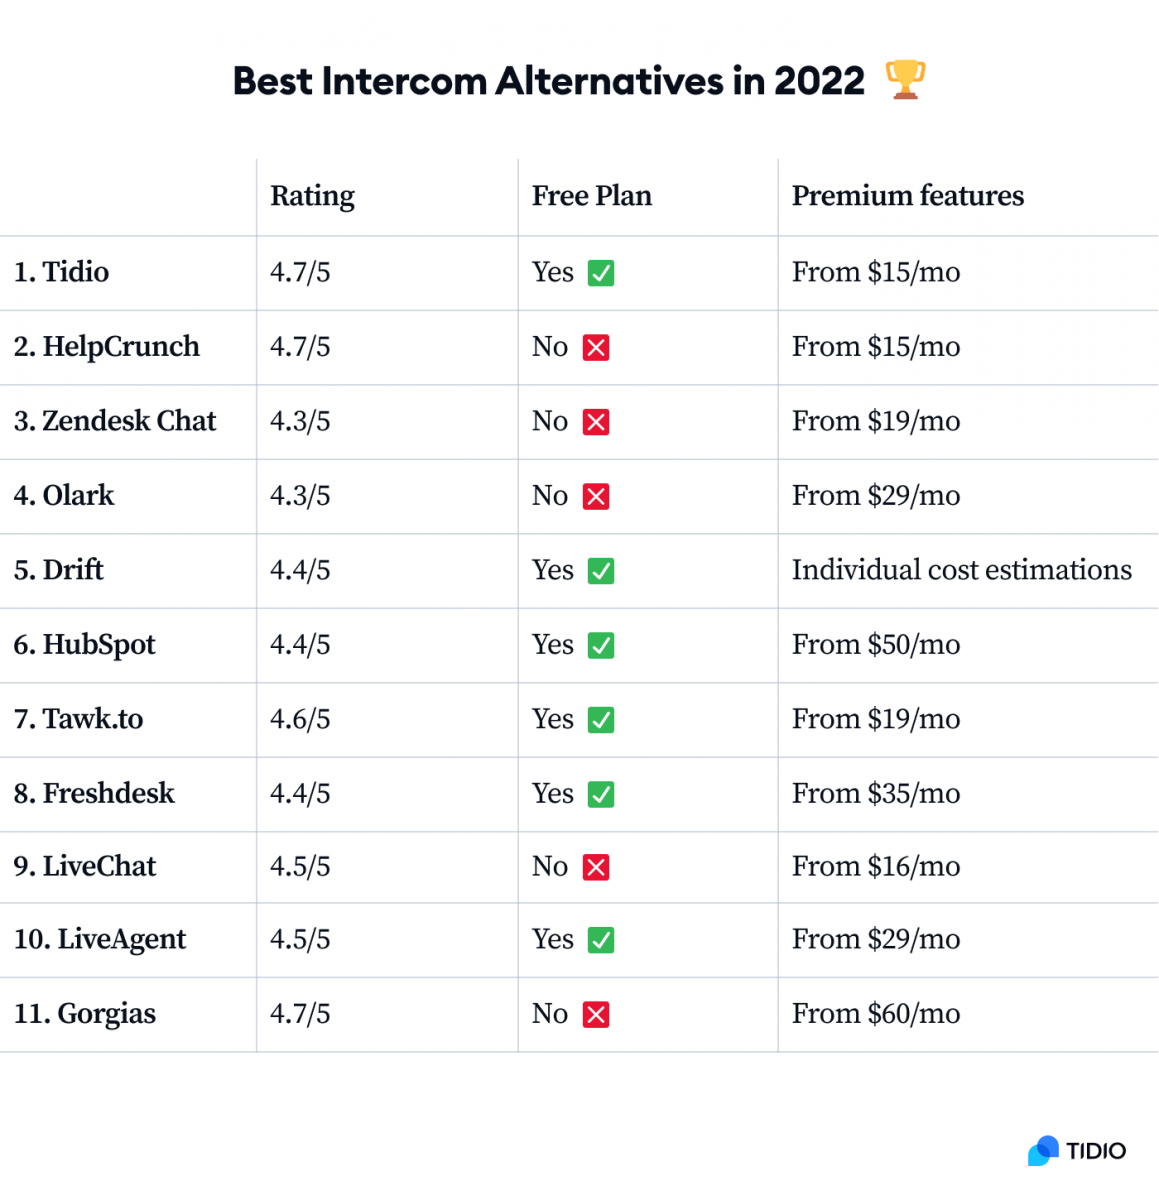 Table comparing rating and pricing of the best Intercom Alternatives in 2022